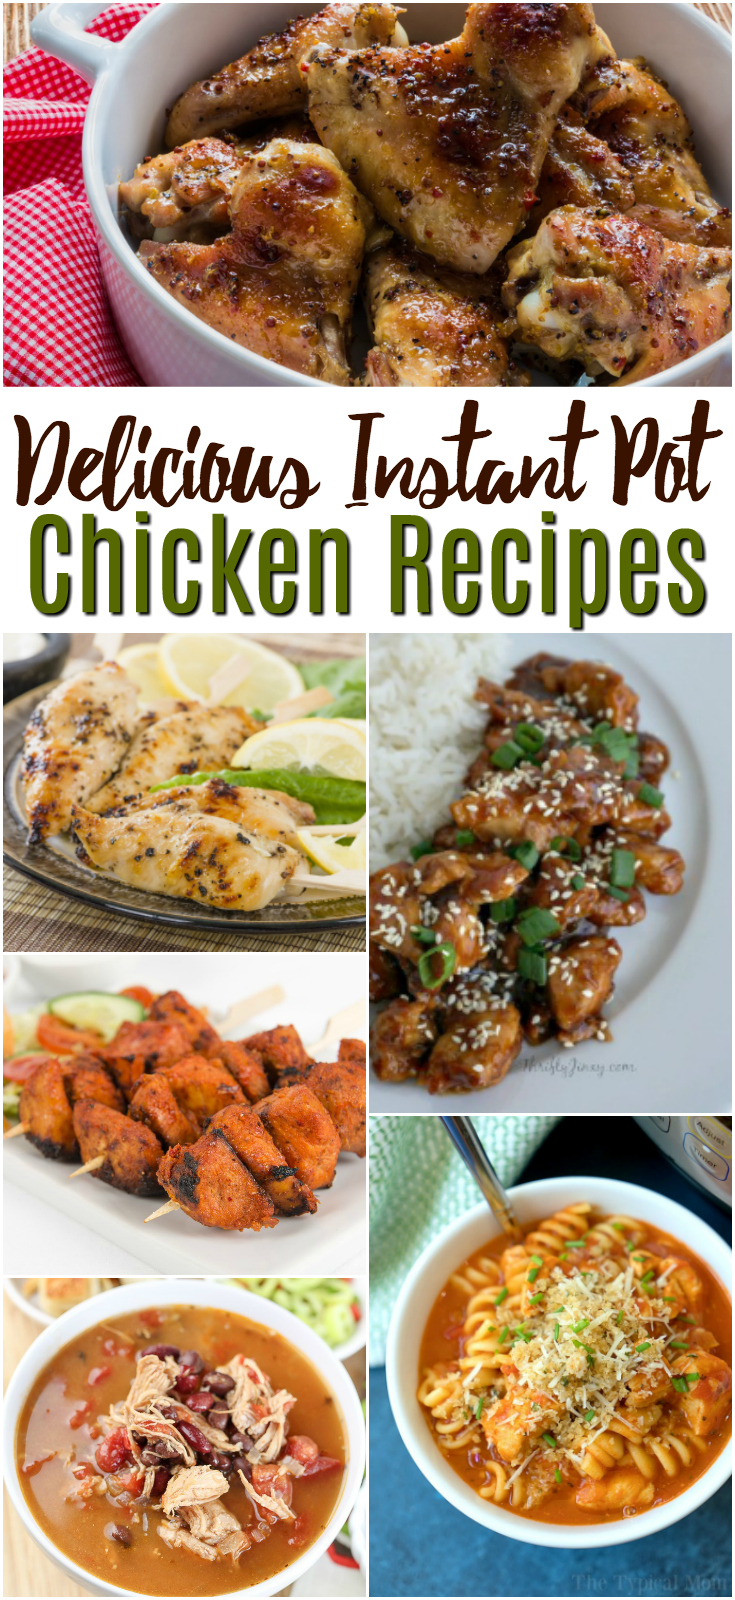 Healthy and delicious Instant Pot chicken recipes that will be an invaluable addition to your weekly family meal rotation!